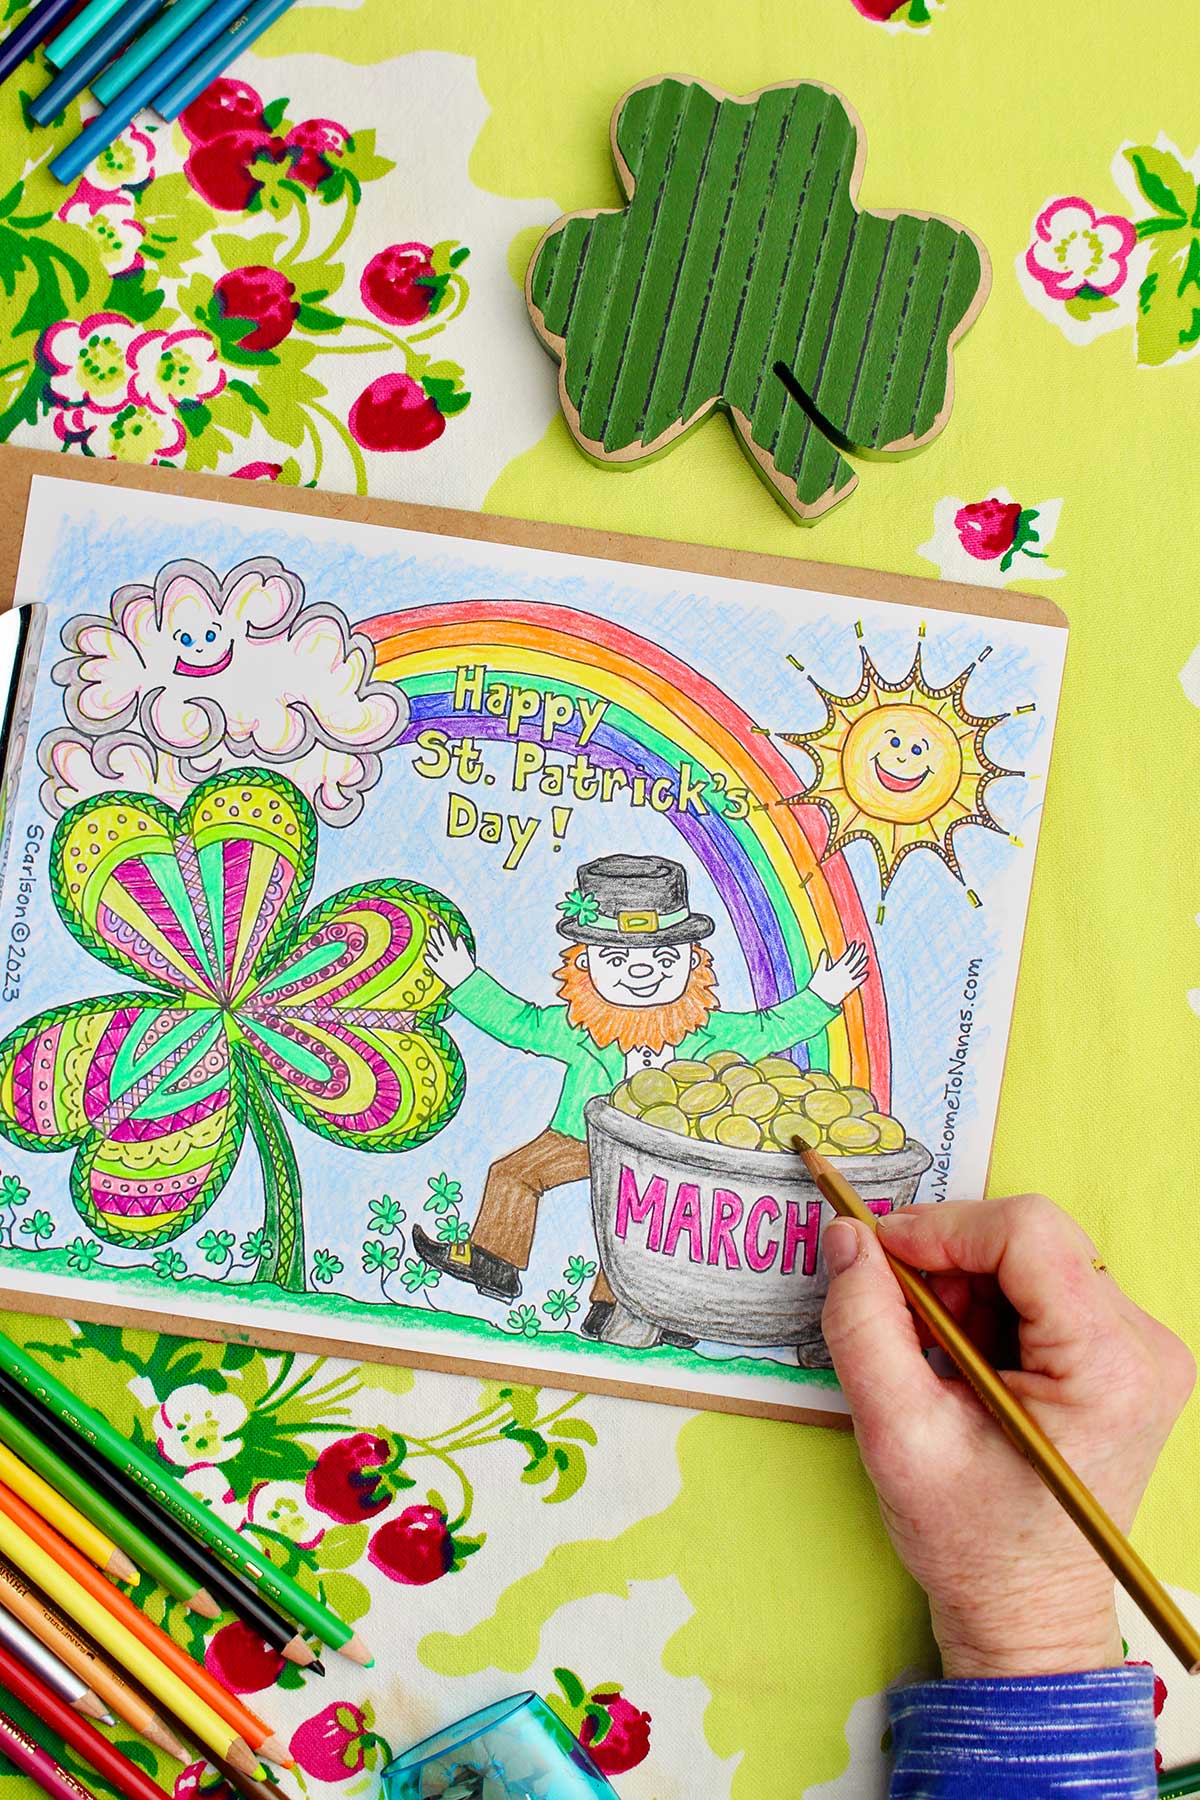 Hand putting finishing touches on pot of gold on St. Patrick's Day coloring page.